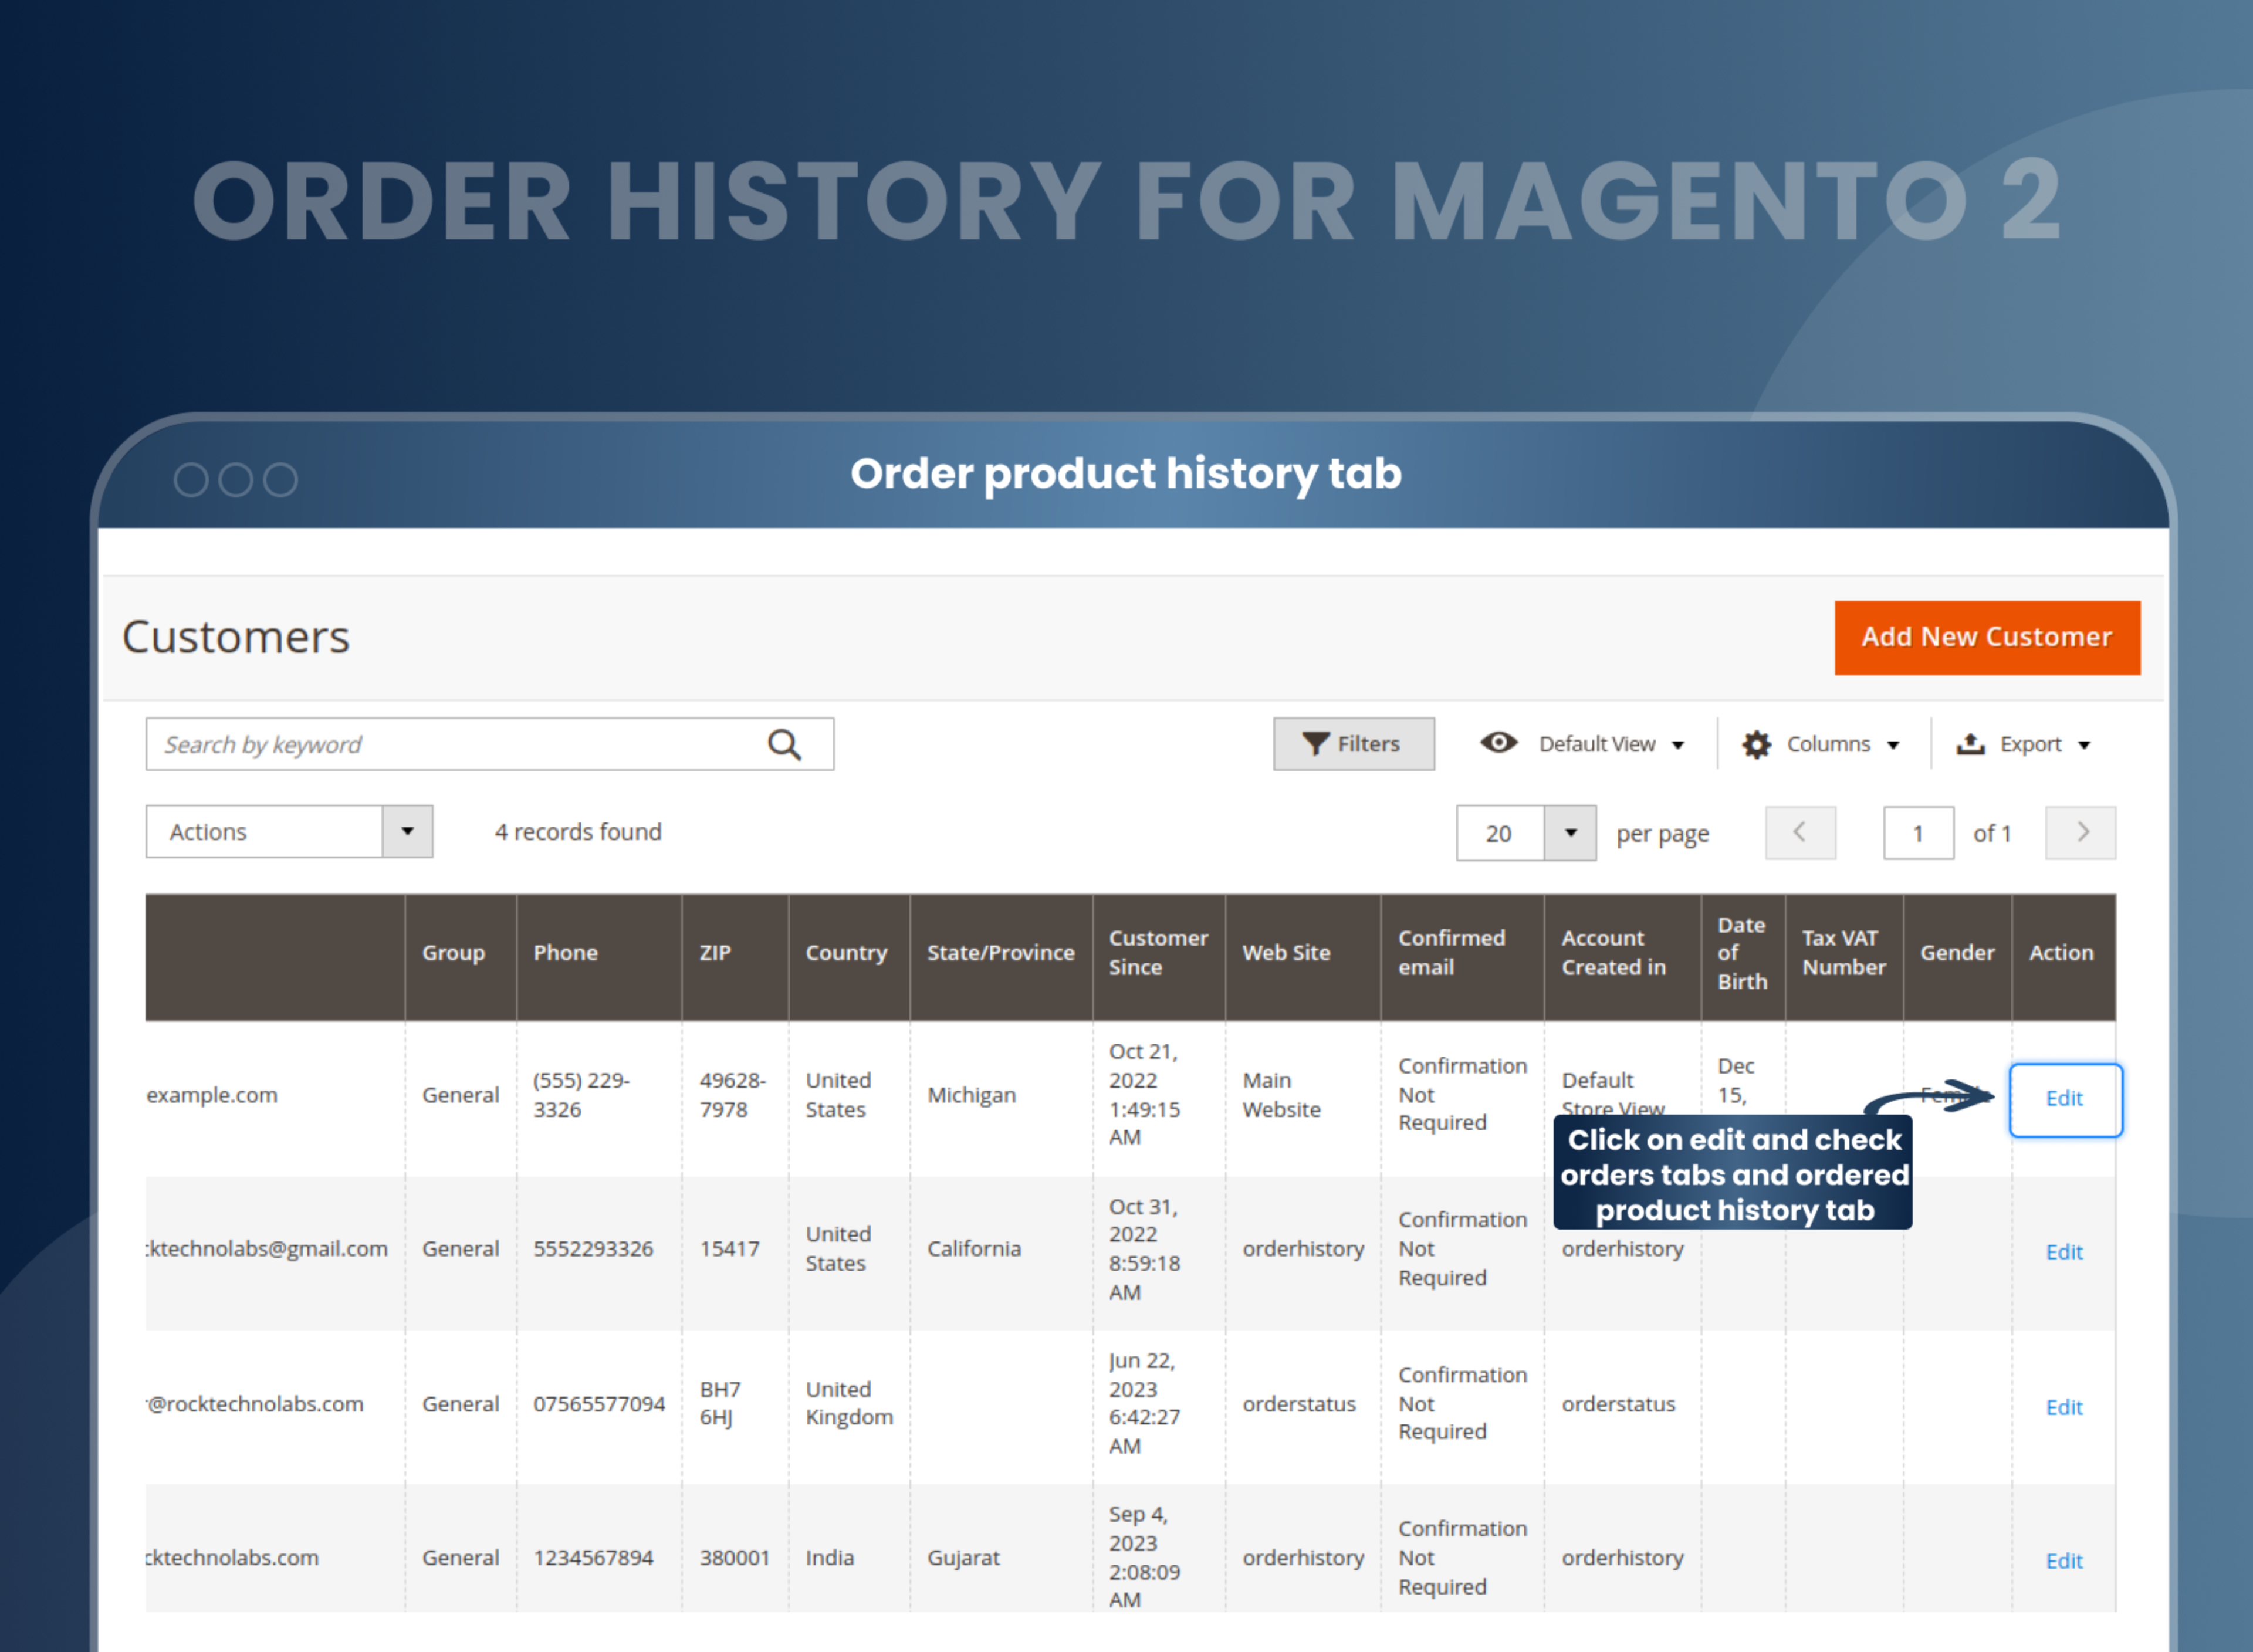 Order product history tab